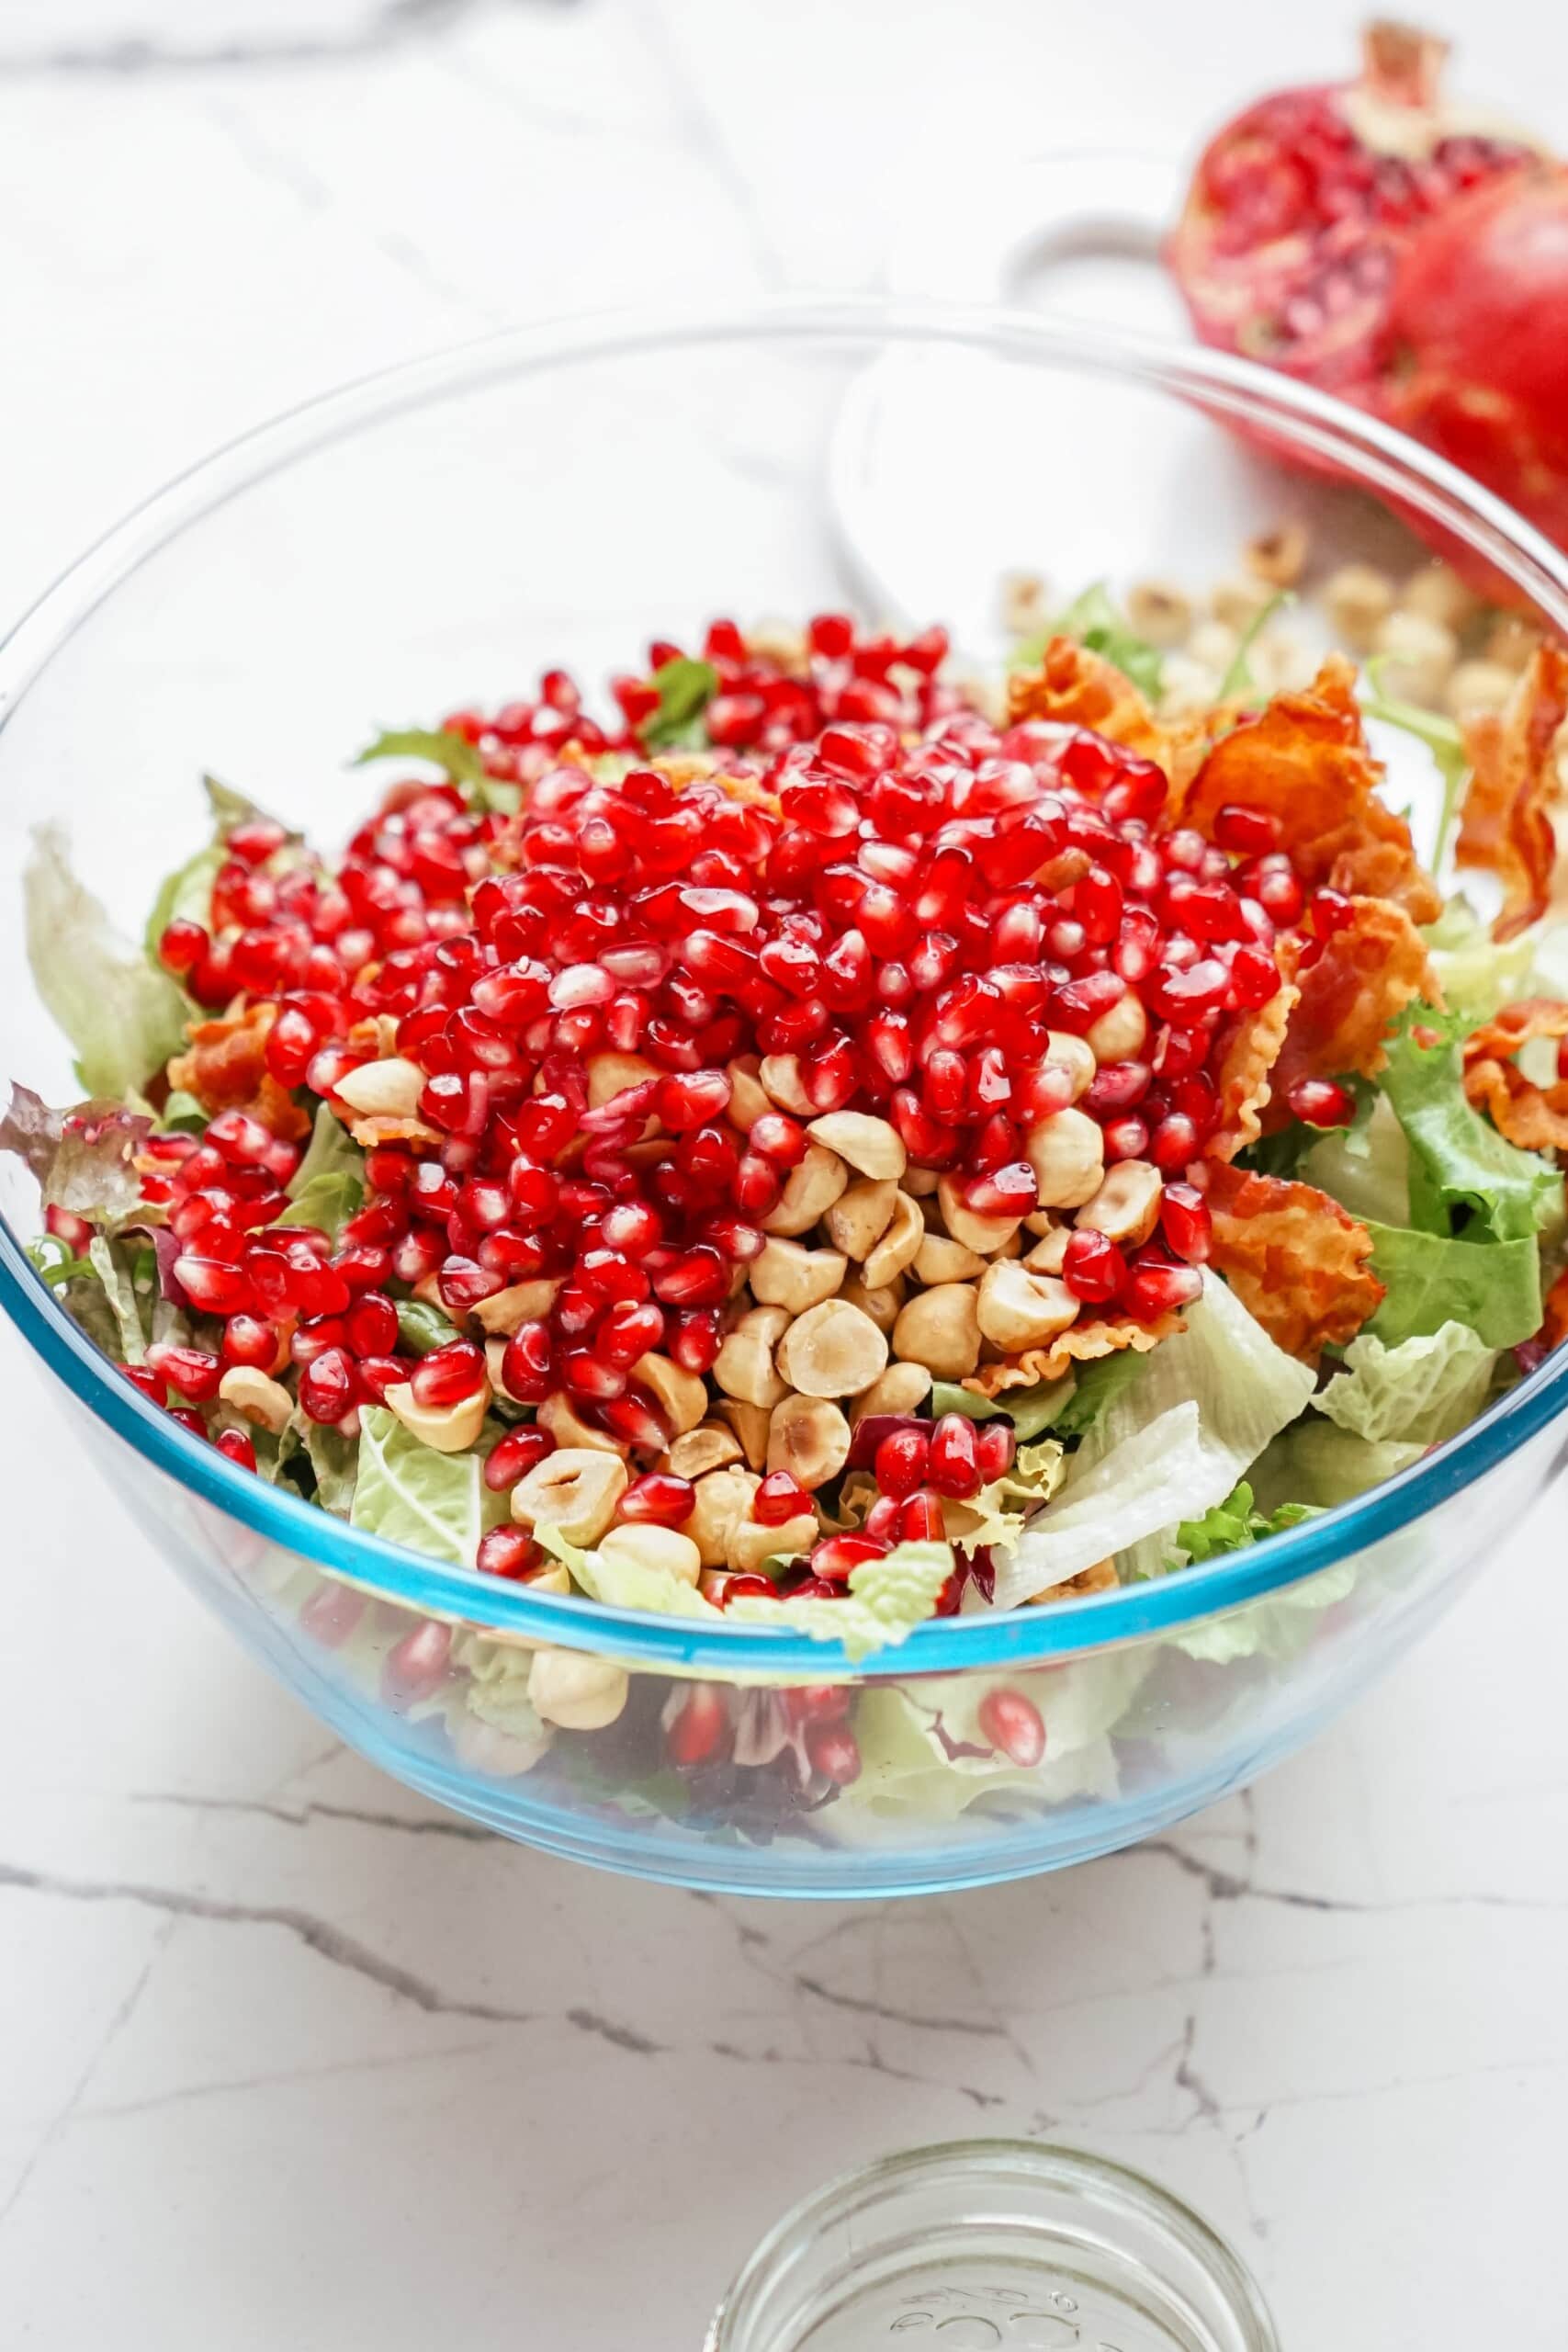 pomegranate added to the salad mixing bowl